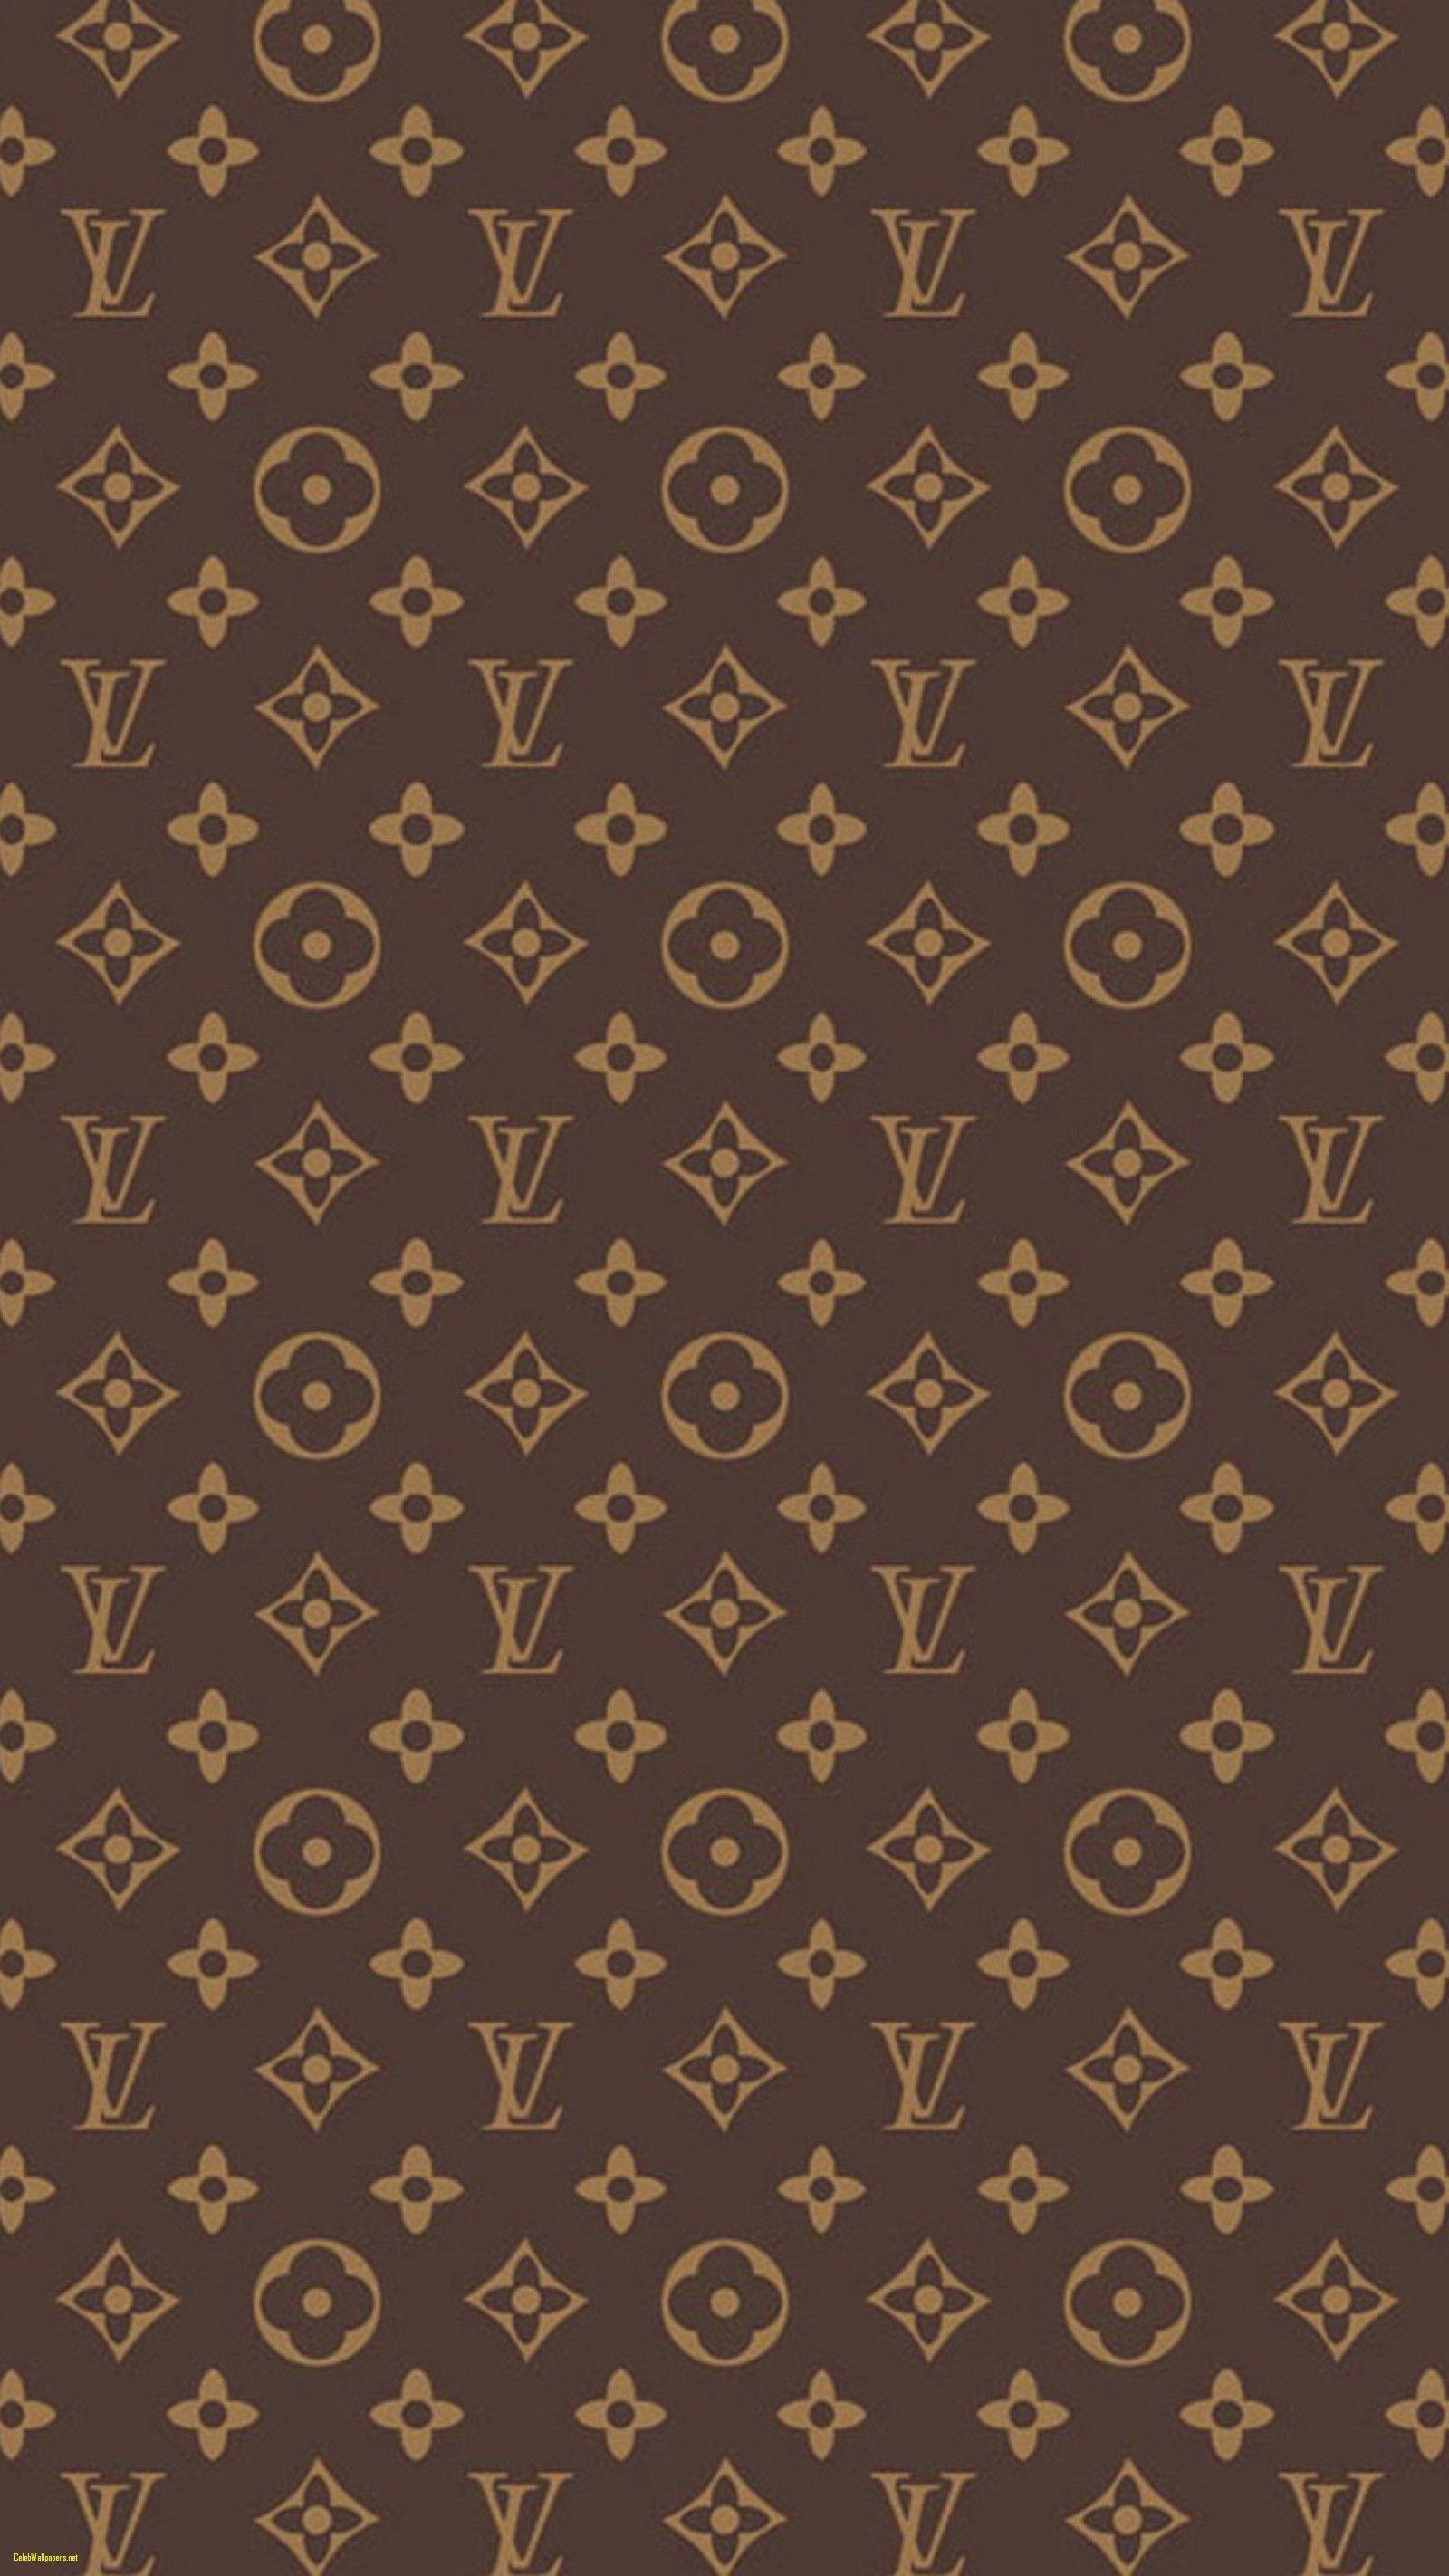 Louis Vuitton v Lee Vanz Sellers Undertake To Pay 1 Lakhs Litigation Cost  To French Company In Trademark Infringement Suit Over Sale Of Footwear  Using LV Logo